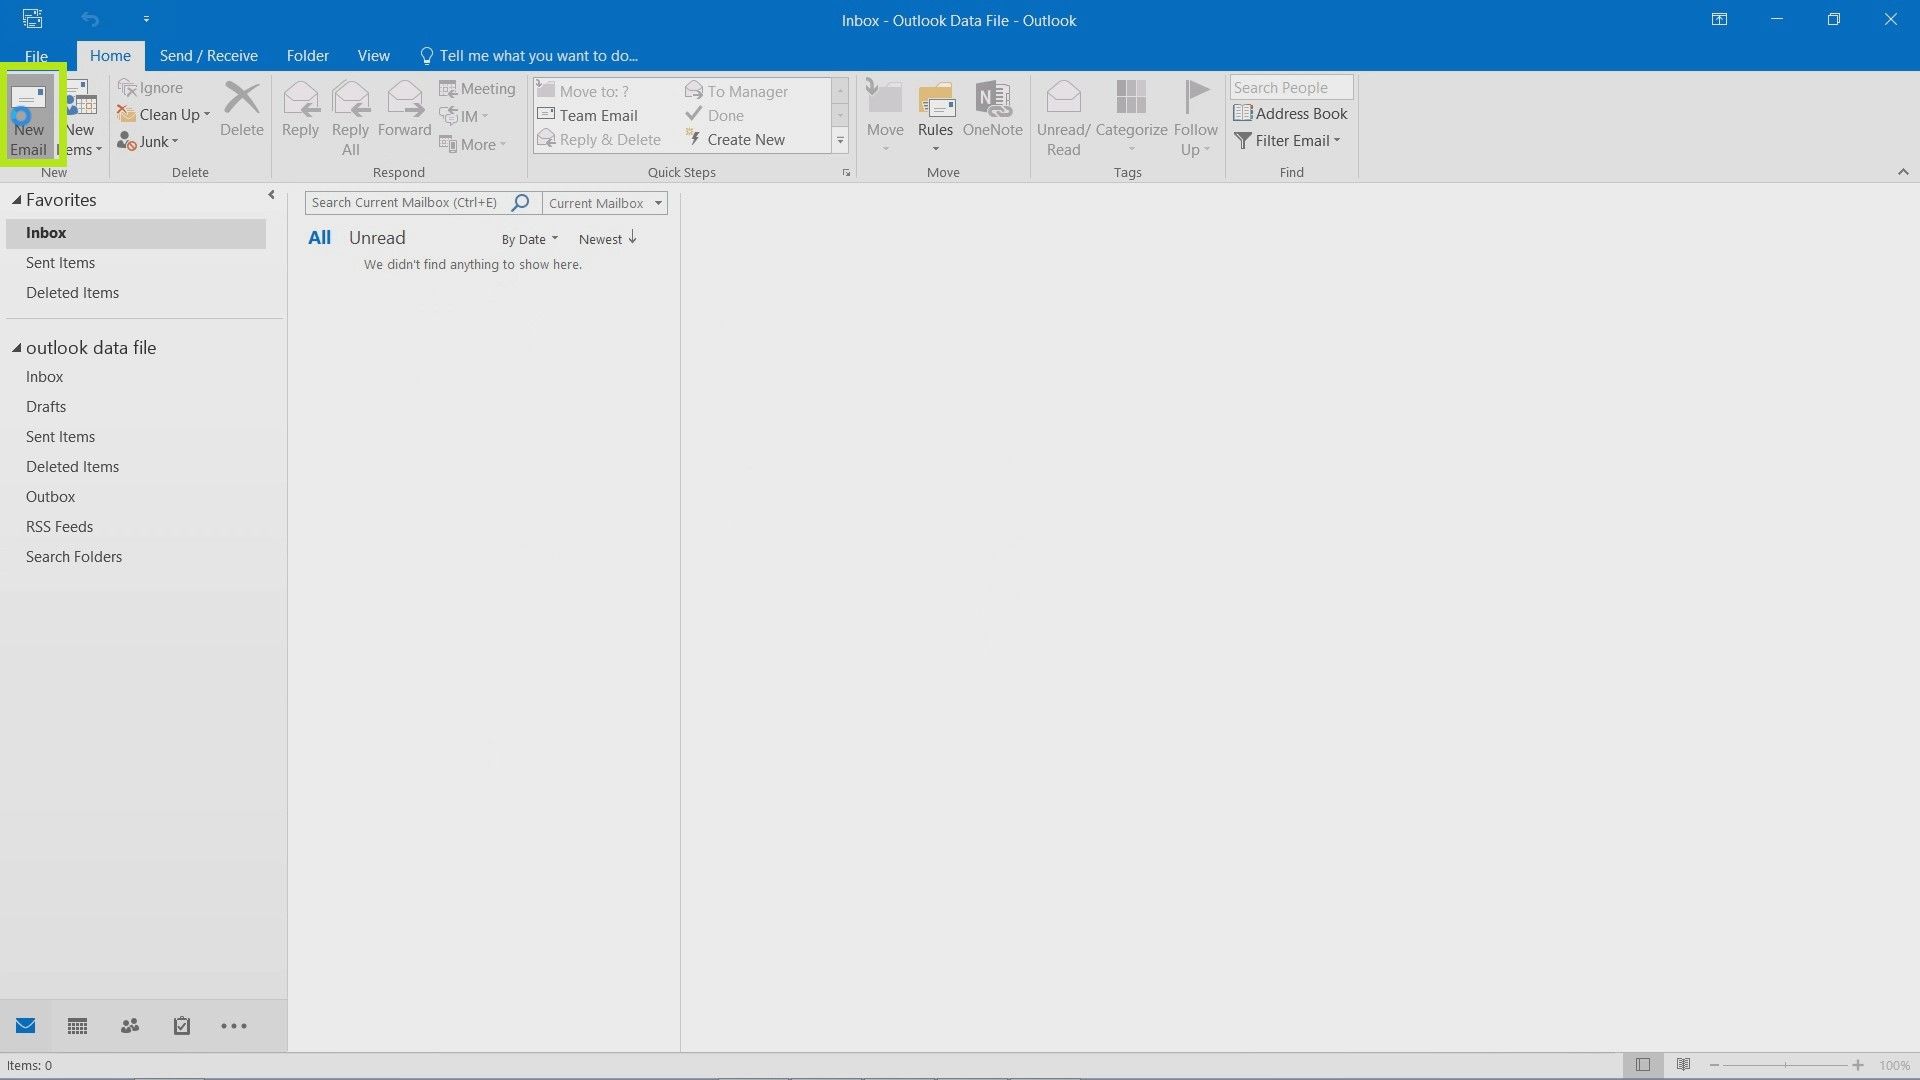 email signature outlook 2016 add image